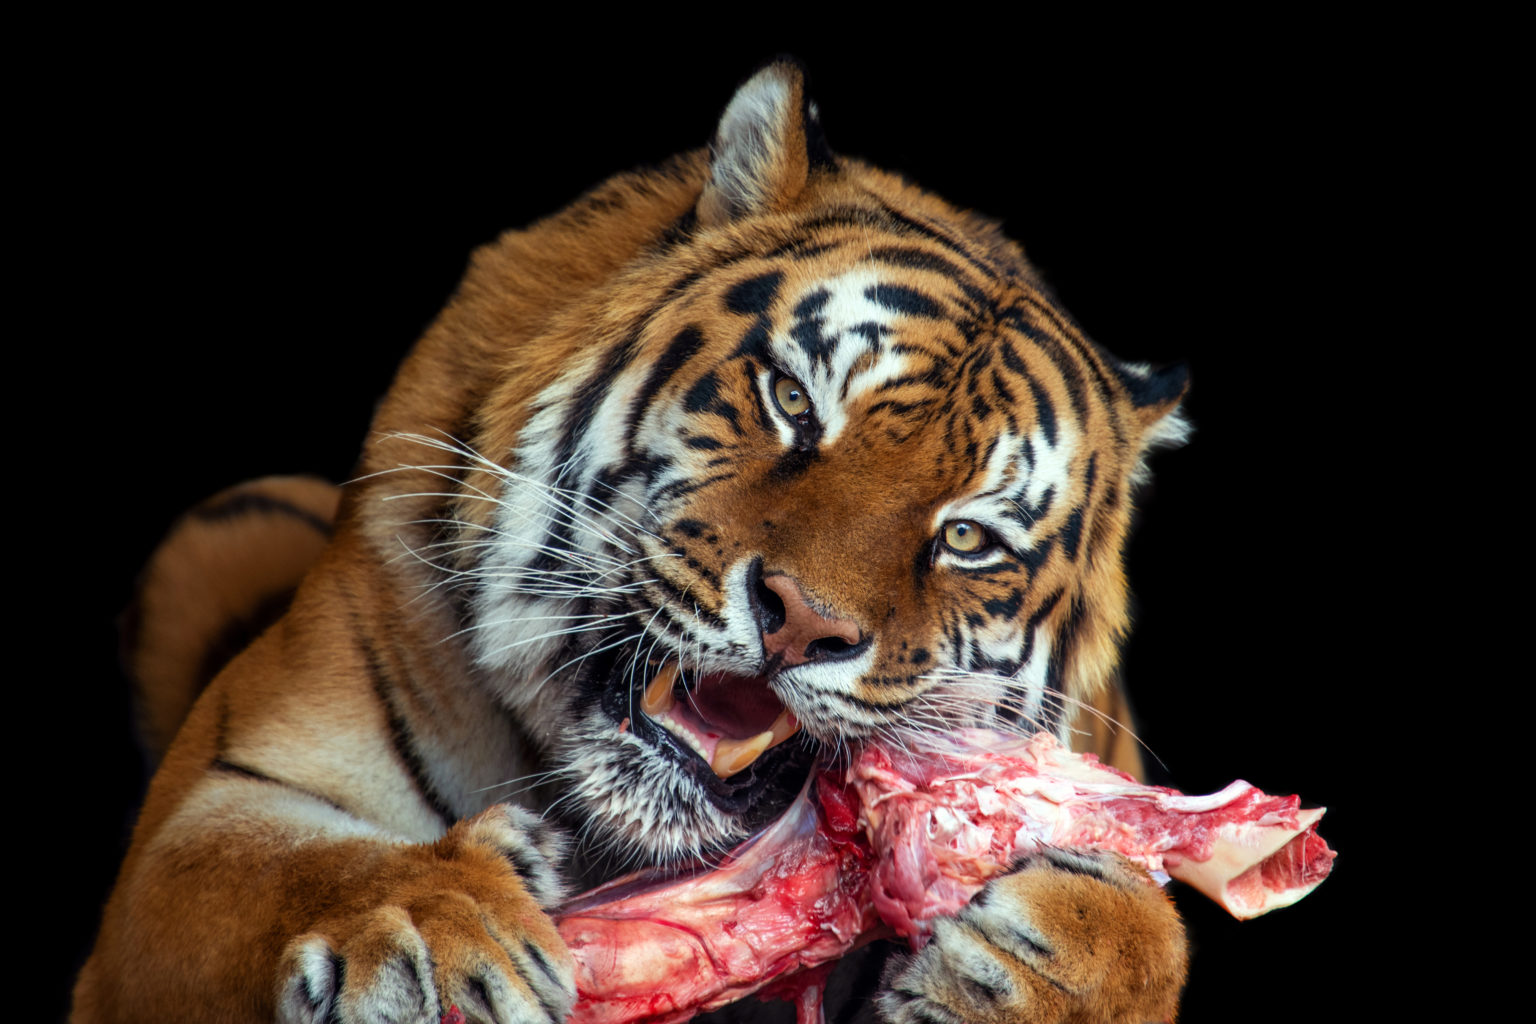 Food for tigers